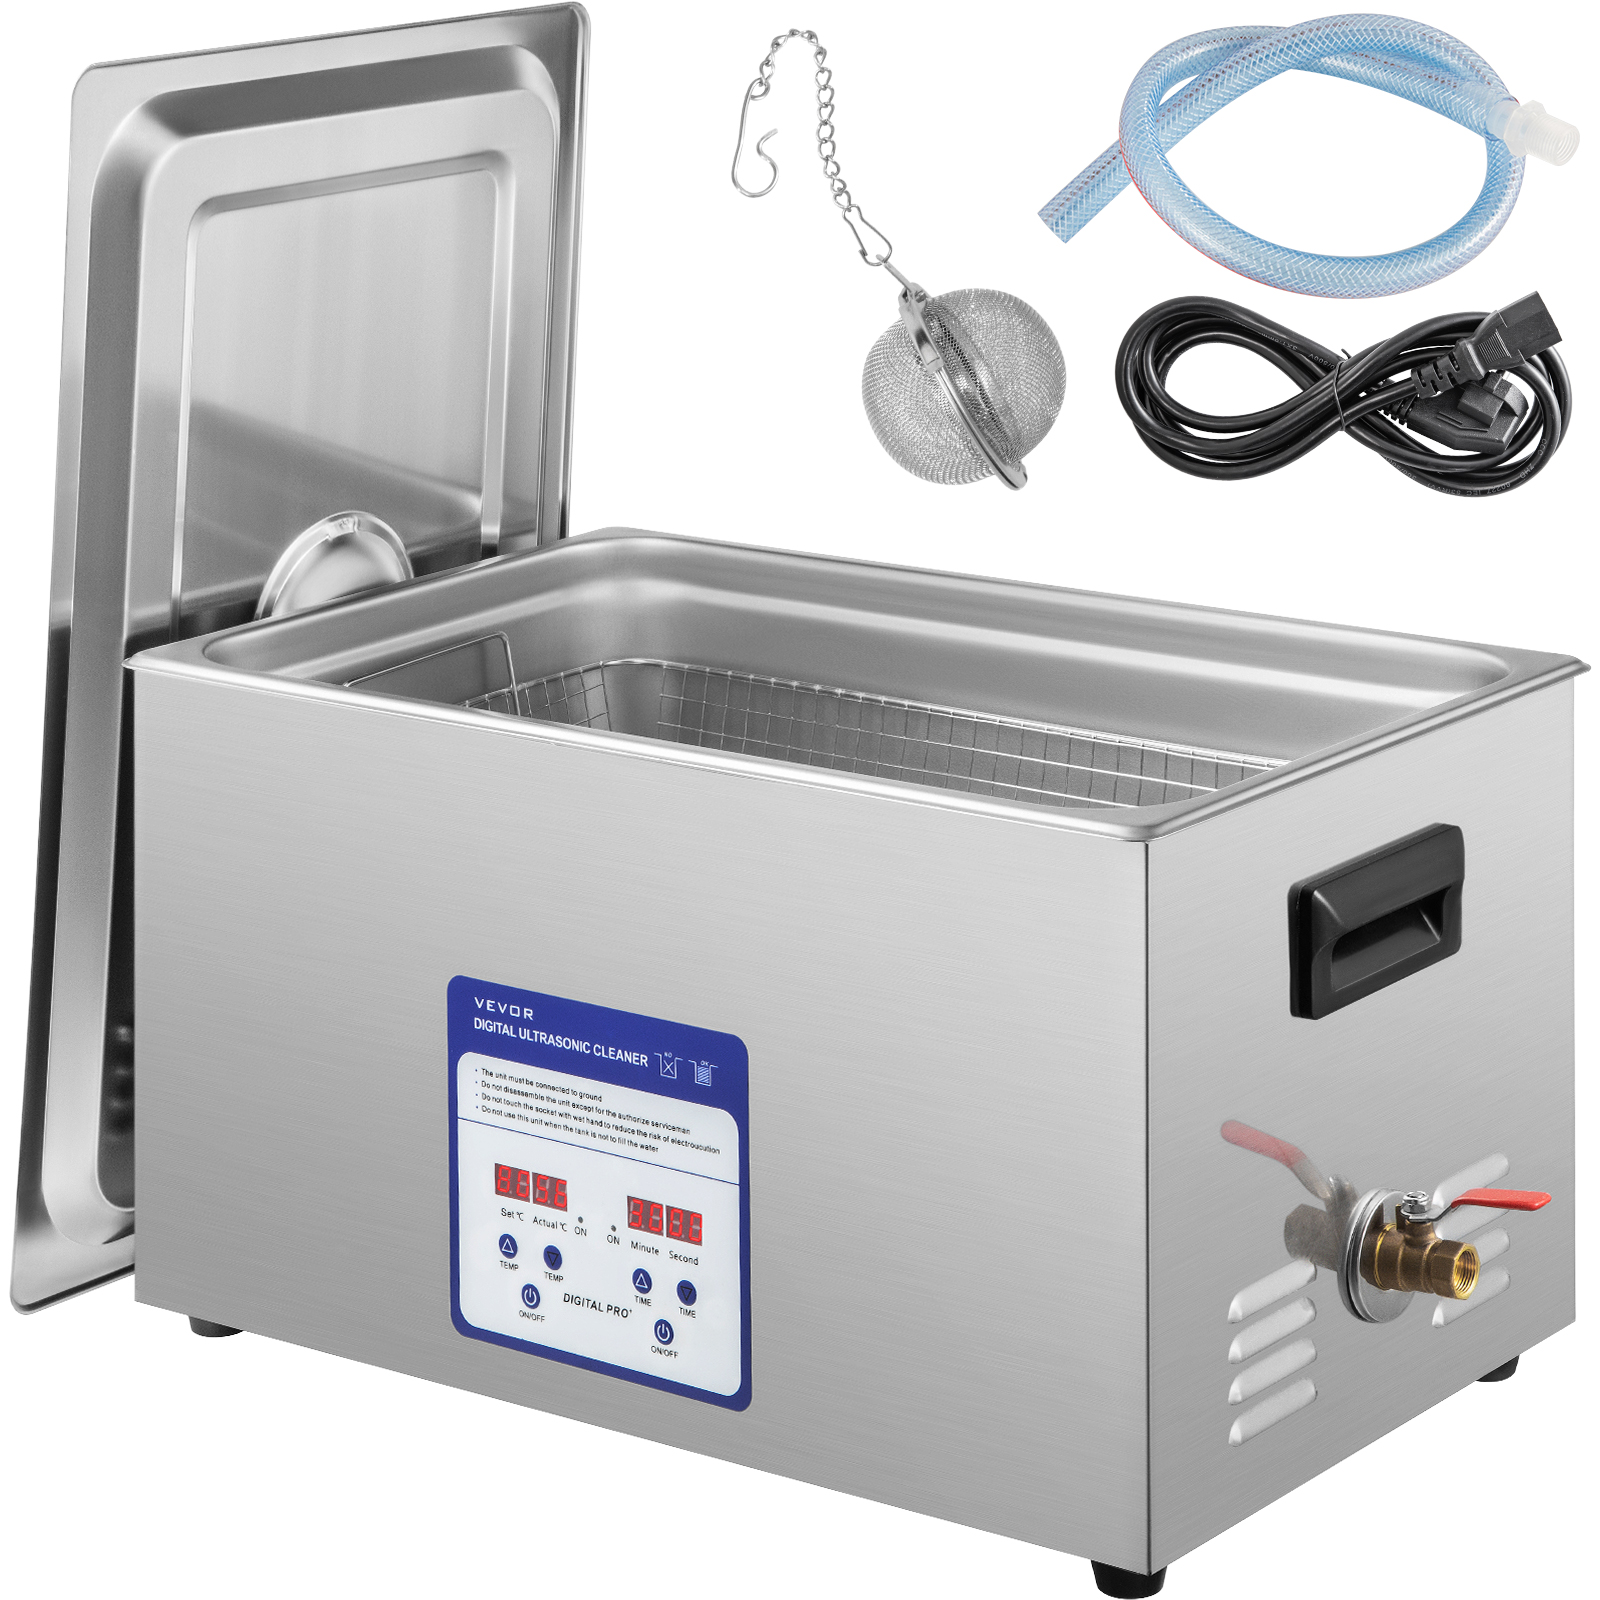 U.S. Solid 3L Mechanical Ultrasonic Cleaner - 40 kHz 0.8Gal Stainless Steel Ultrasonic Cleaning Machine with Mechanical Control Knob for Industrial